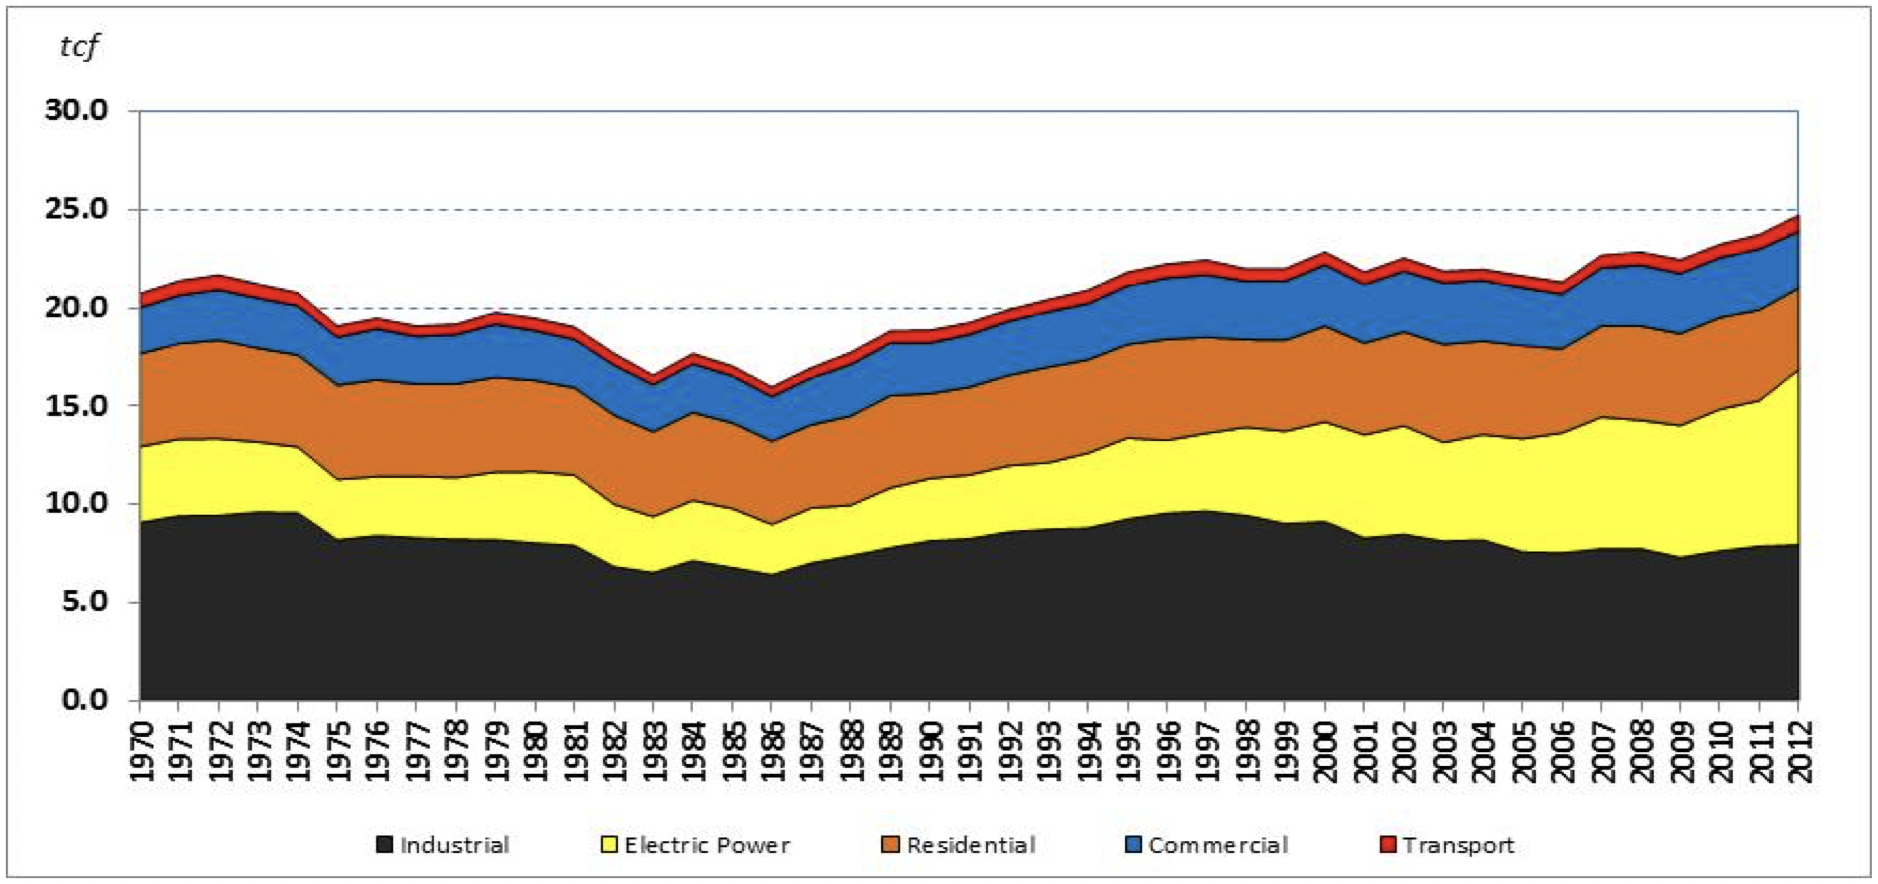 This graph compares U.S. natural gas demand by end-use sector over time.